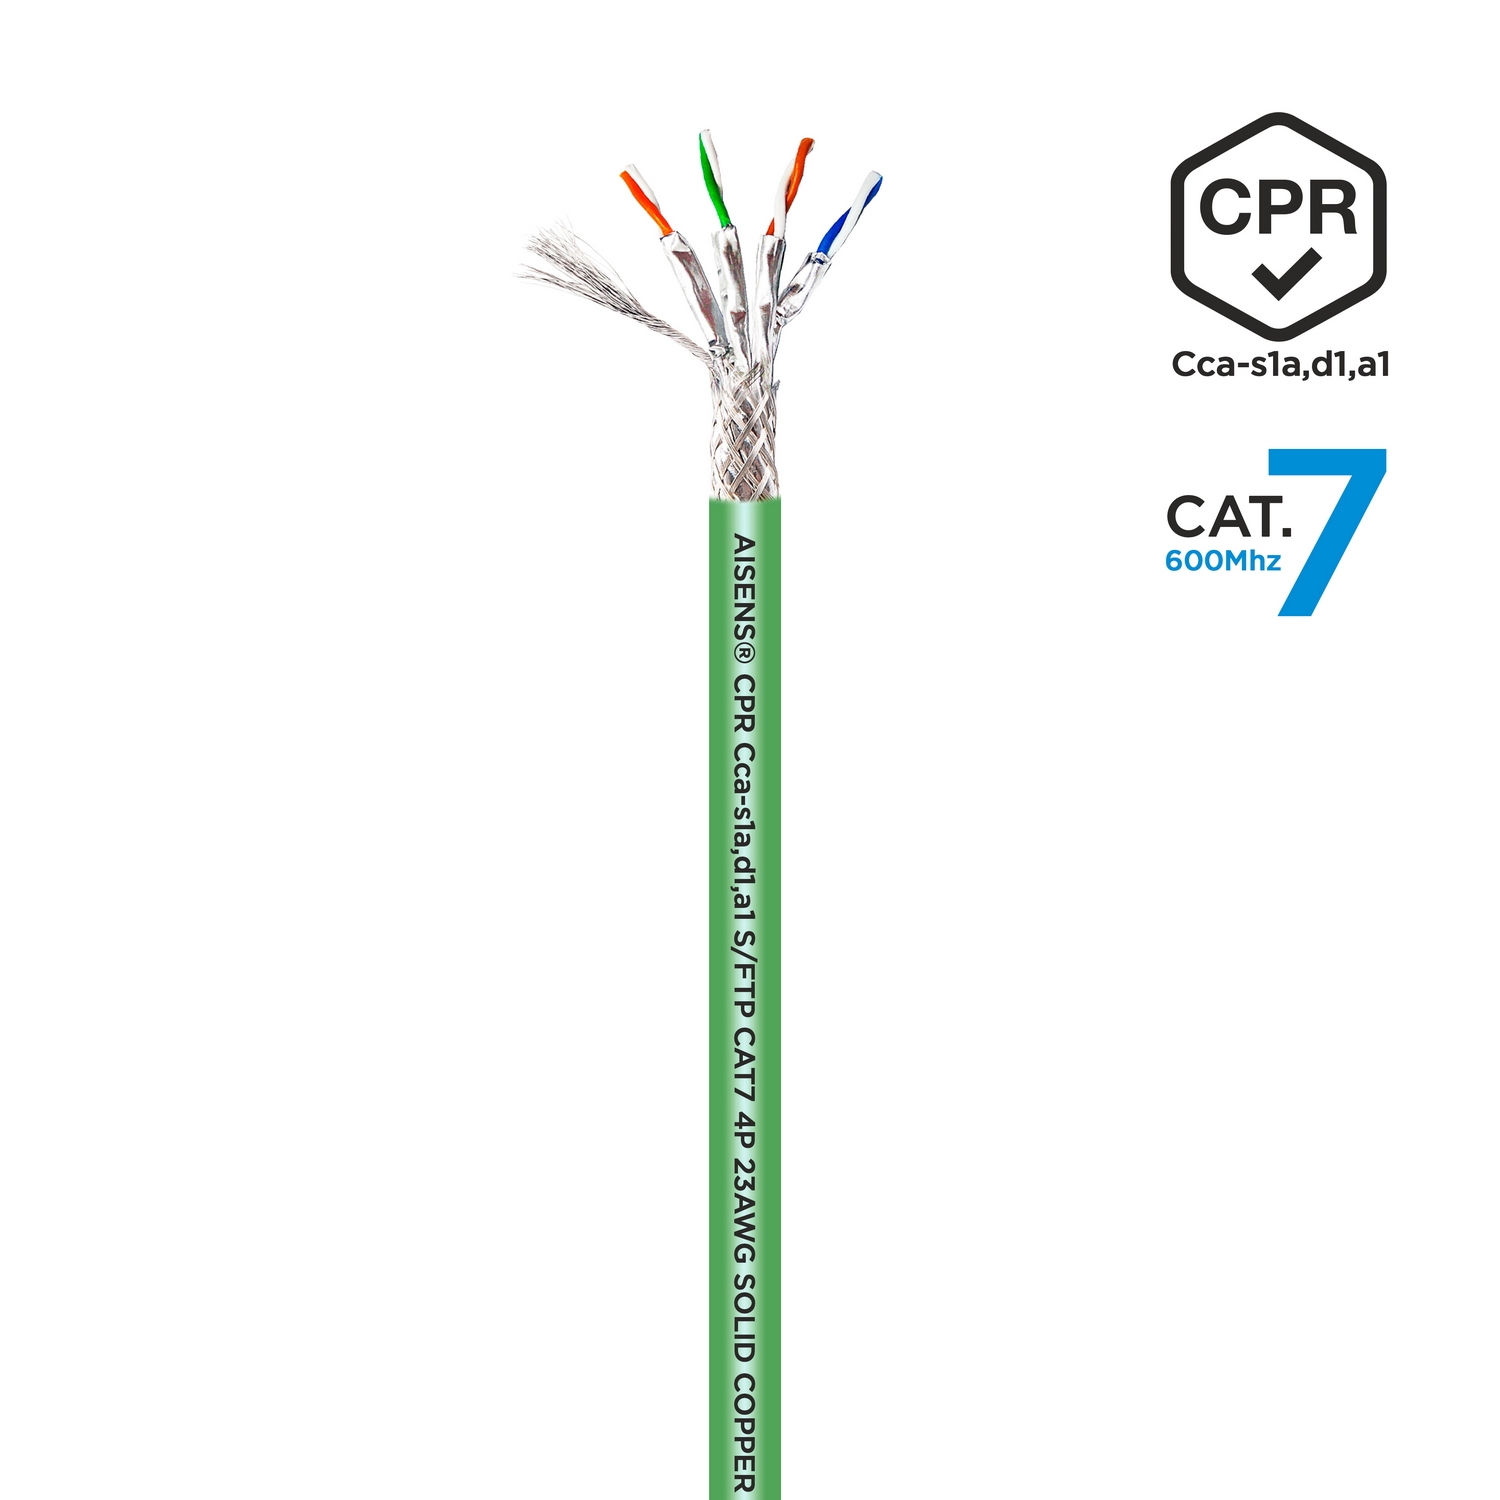 UGREEN Cable de Red Cat 7 Cable Ethernet Network Cable Plano LAN 10000Mbit  con Conector RJ45